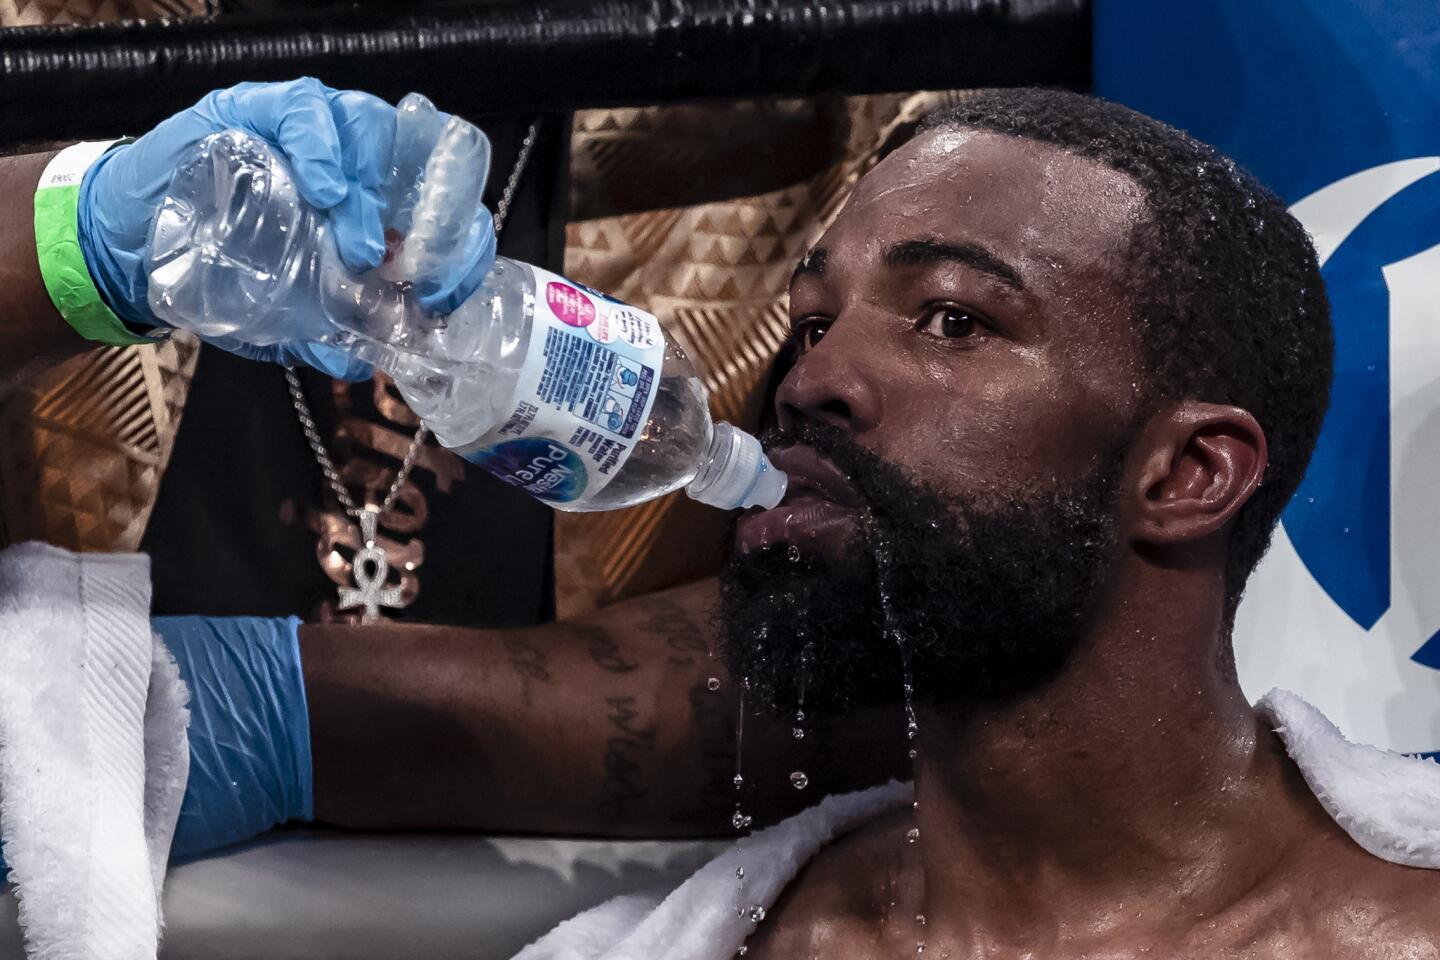 OXON HILL, MD - MAY 19: Gary Russell Jr. takes a drink in the corner prior to the 12th round against Joseph Diaz Jr. of the WBC featherweight title bout at MGM National Harbor on May 19, 2018 in Oxon Hill, Maryland. Russell won by unanimous decision. (Photo by Scott Taetsch/Getty Images) ** OUTS - ELSENT, FPG, CM - OUTS * NM, PH, VA if sourced by CT, LA or MoD **